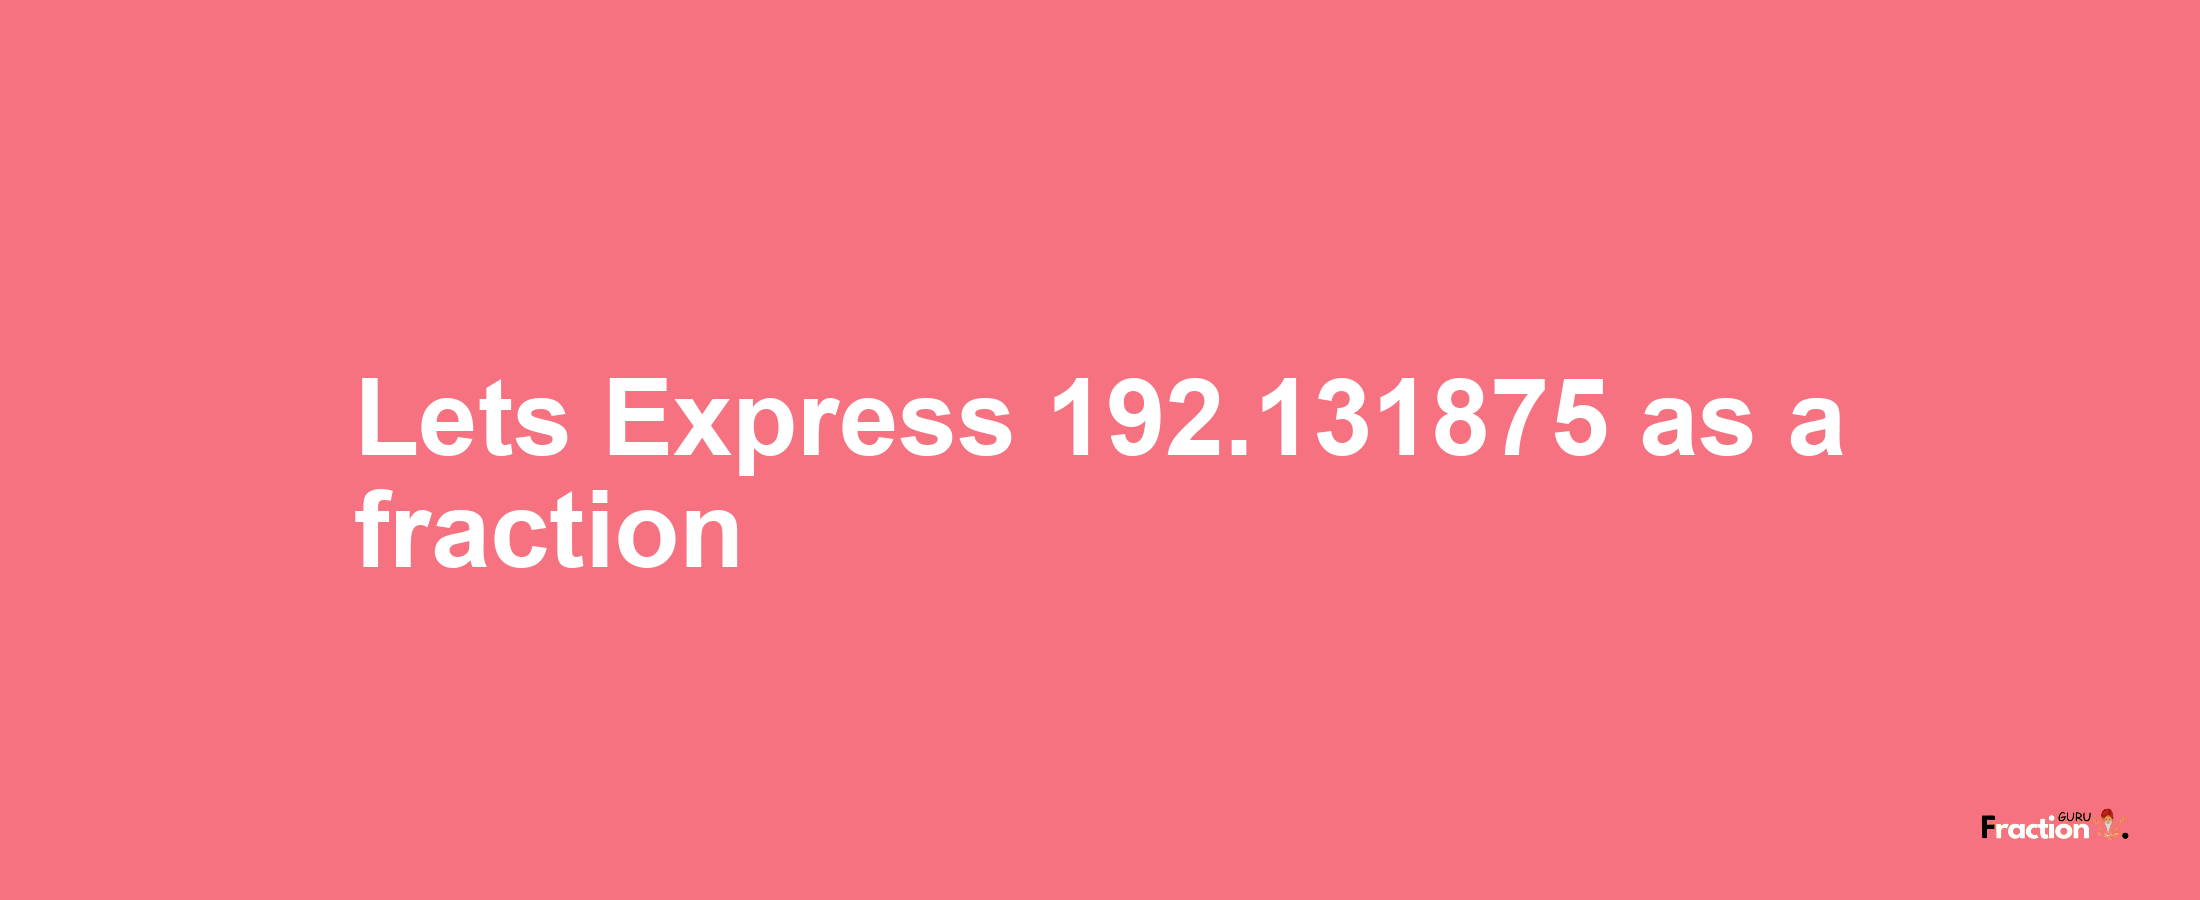 Lets Express 192.131875 as afraction